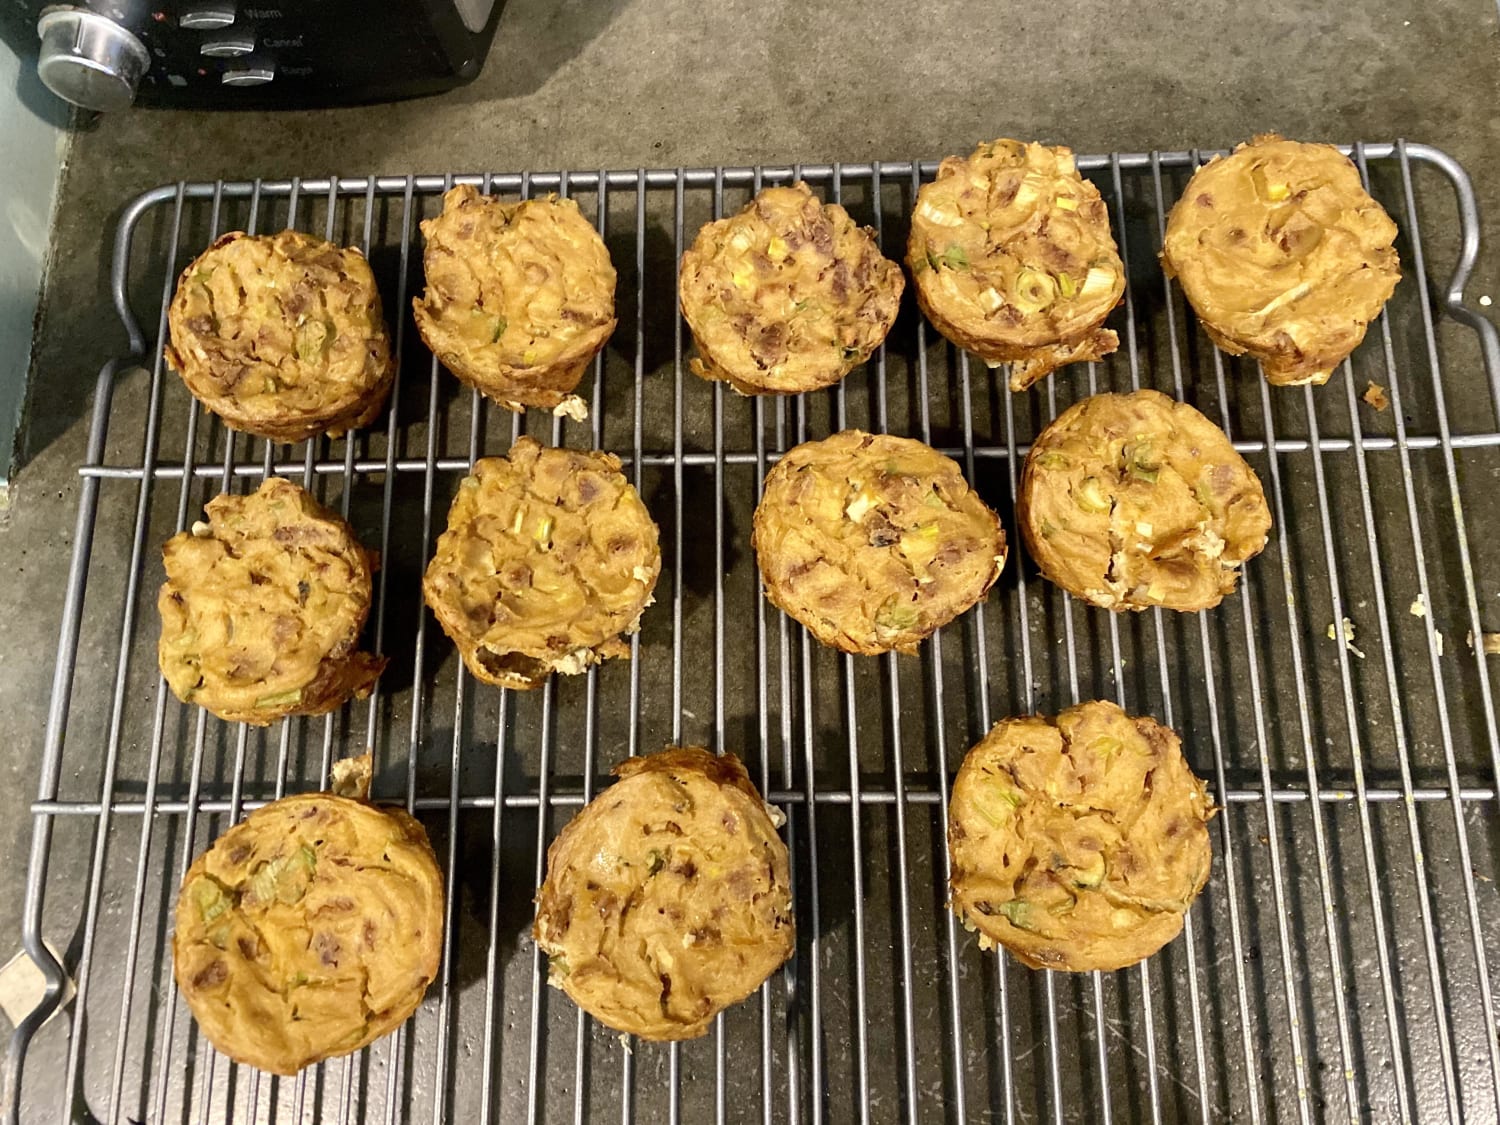 Made mini vegan frittatas for meal prep. Perfect for Easter brunch!